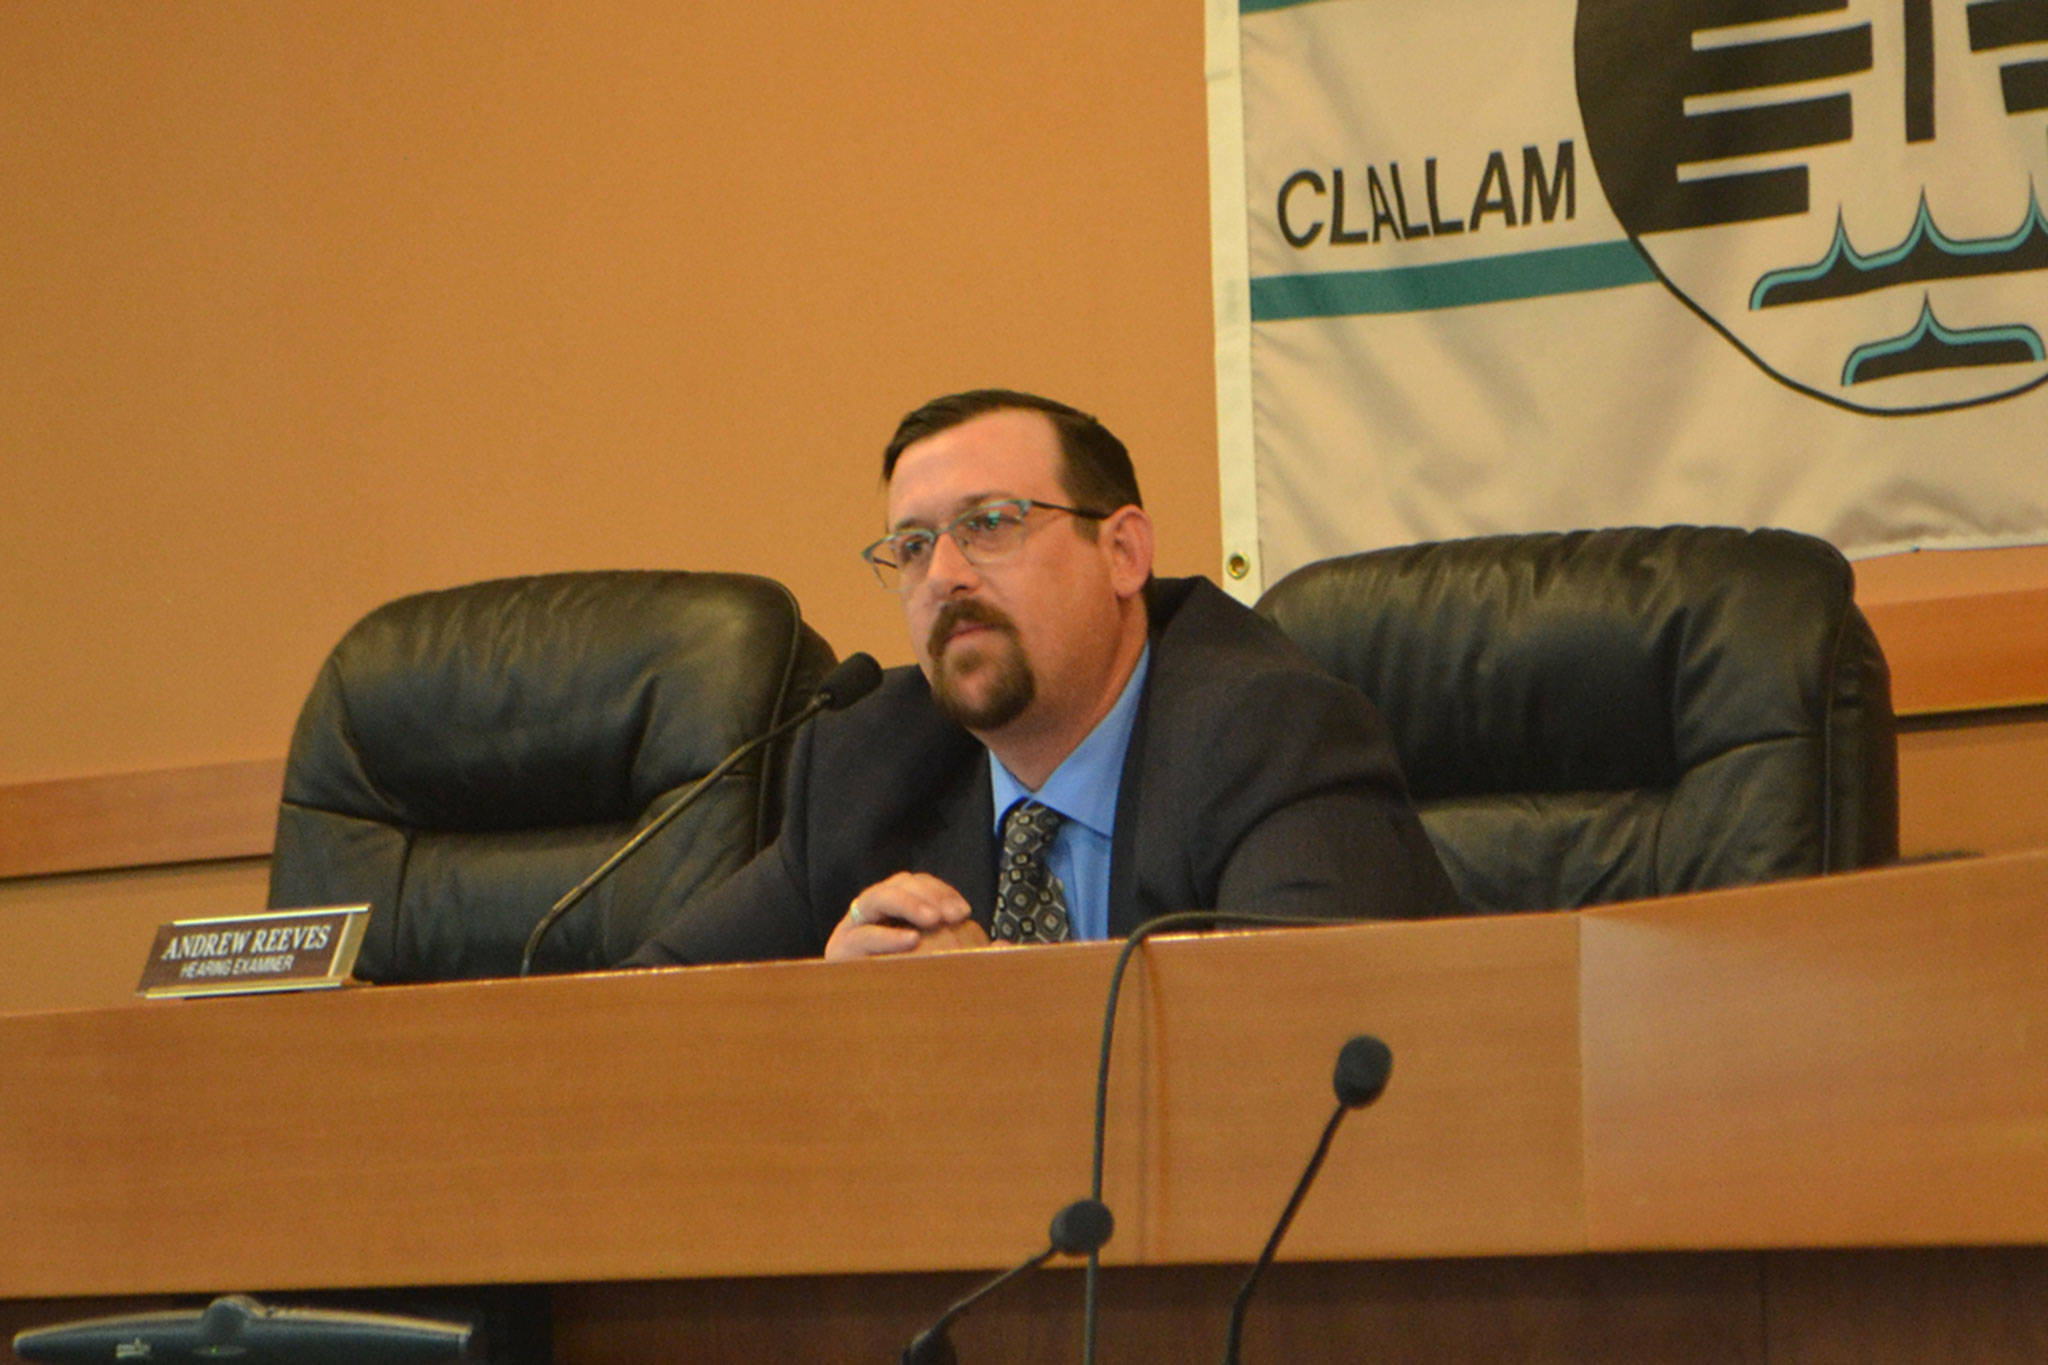 Clallam County Hearing Examiner Andrew Reeves listens to testimony June 1 in the Clallam County Courthouse about a proposed modular home community in Carlsborg.